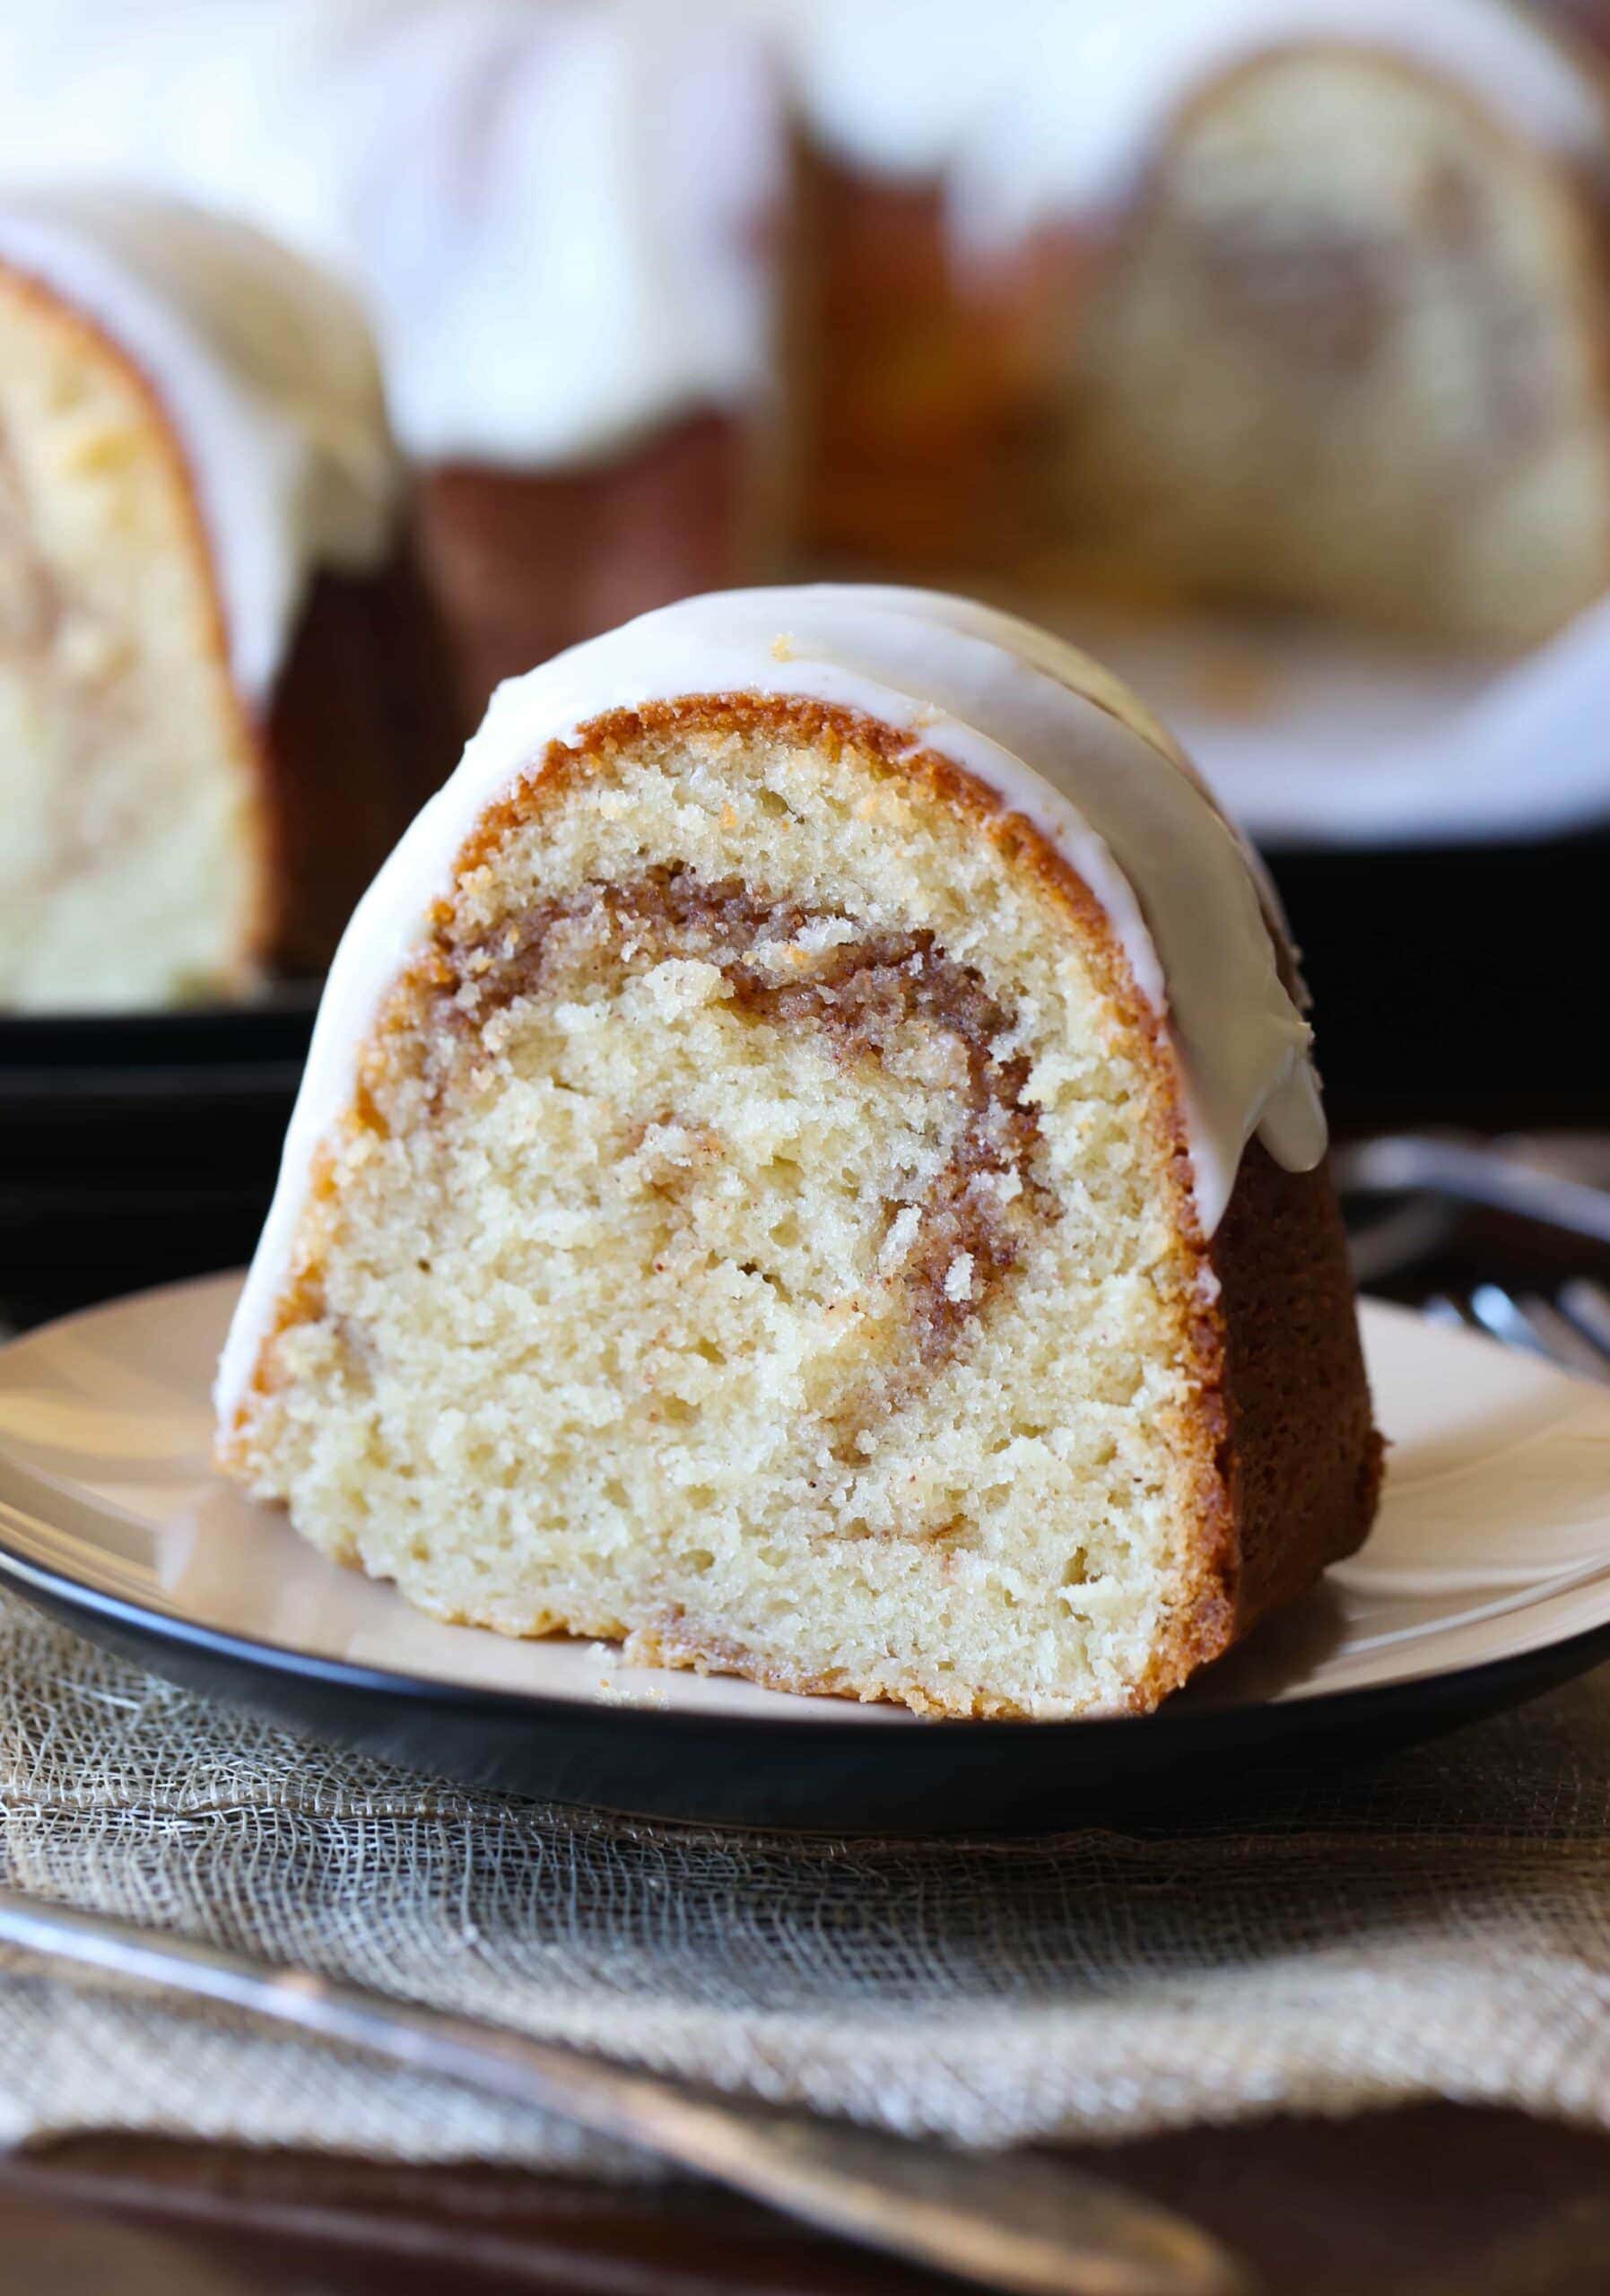 This Cinnamon Roll Pound Cake is incredibly buttery, sweet and swirled with cinnamon. The texture is soft and moist. Perfection!